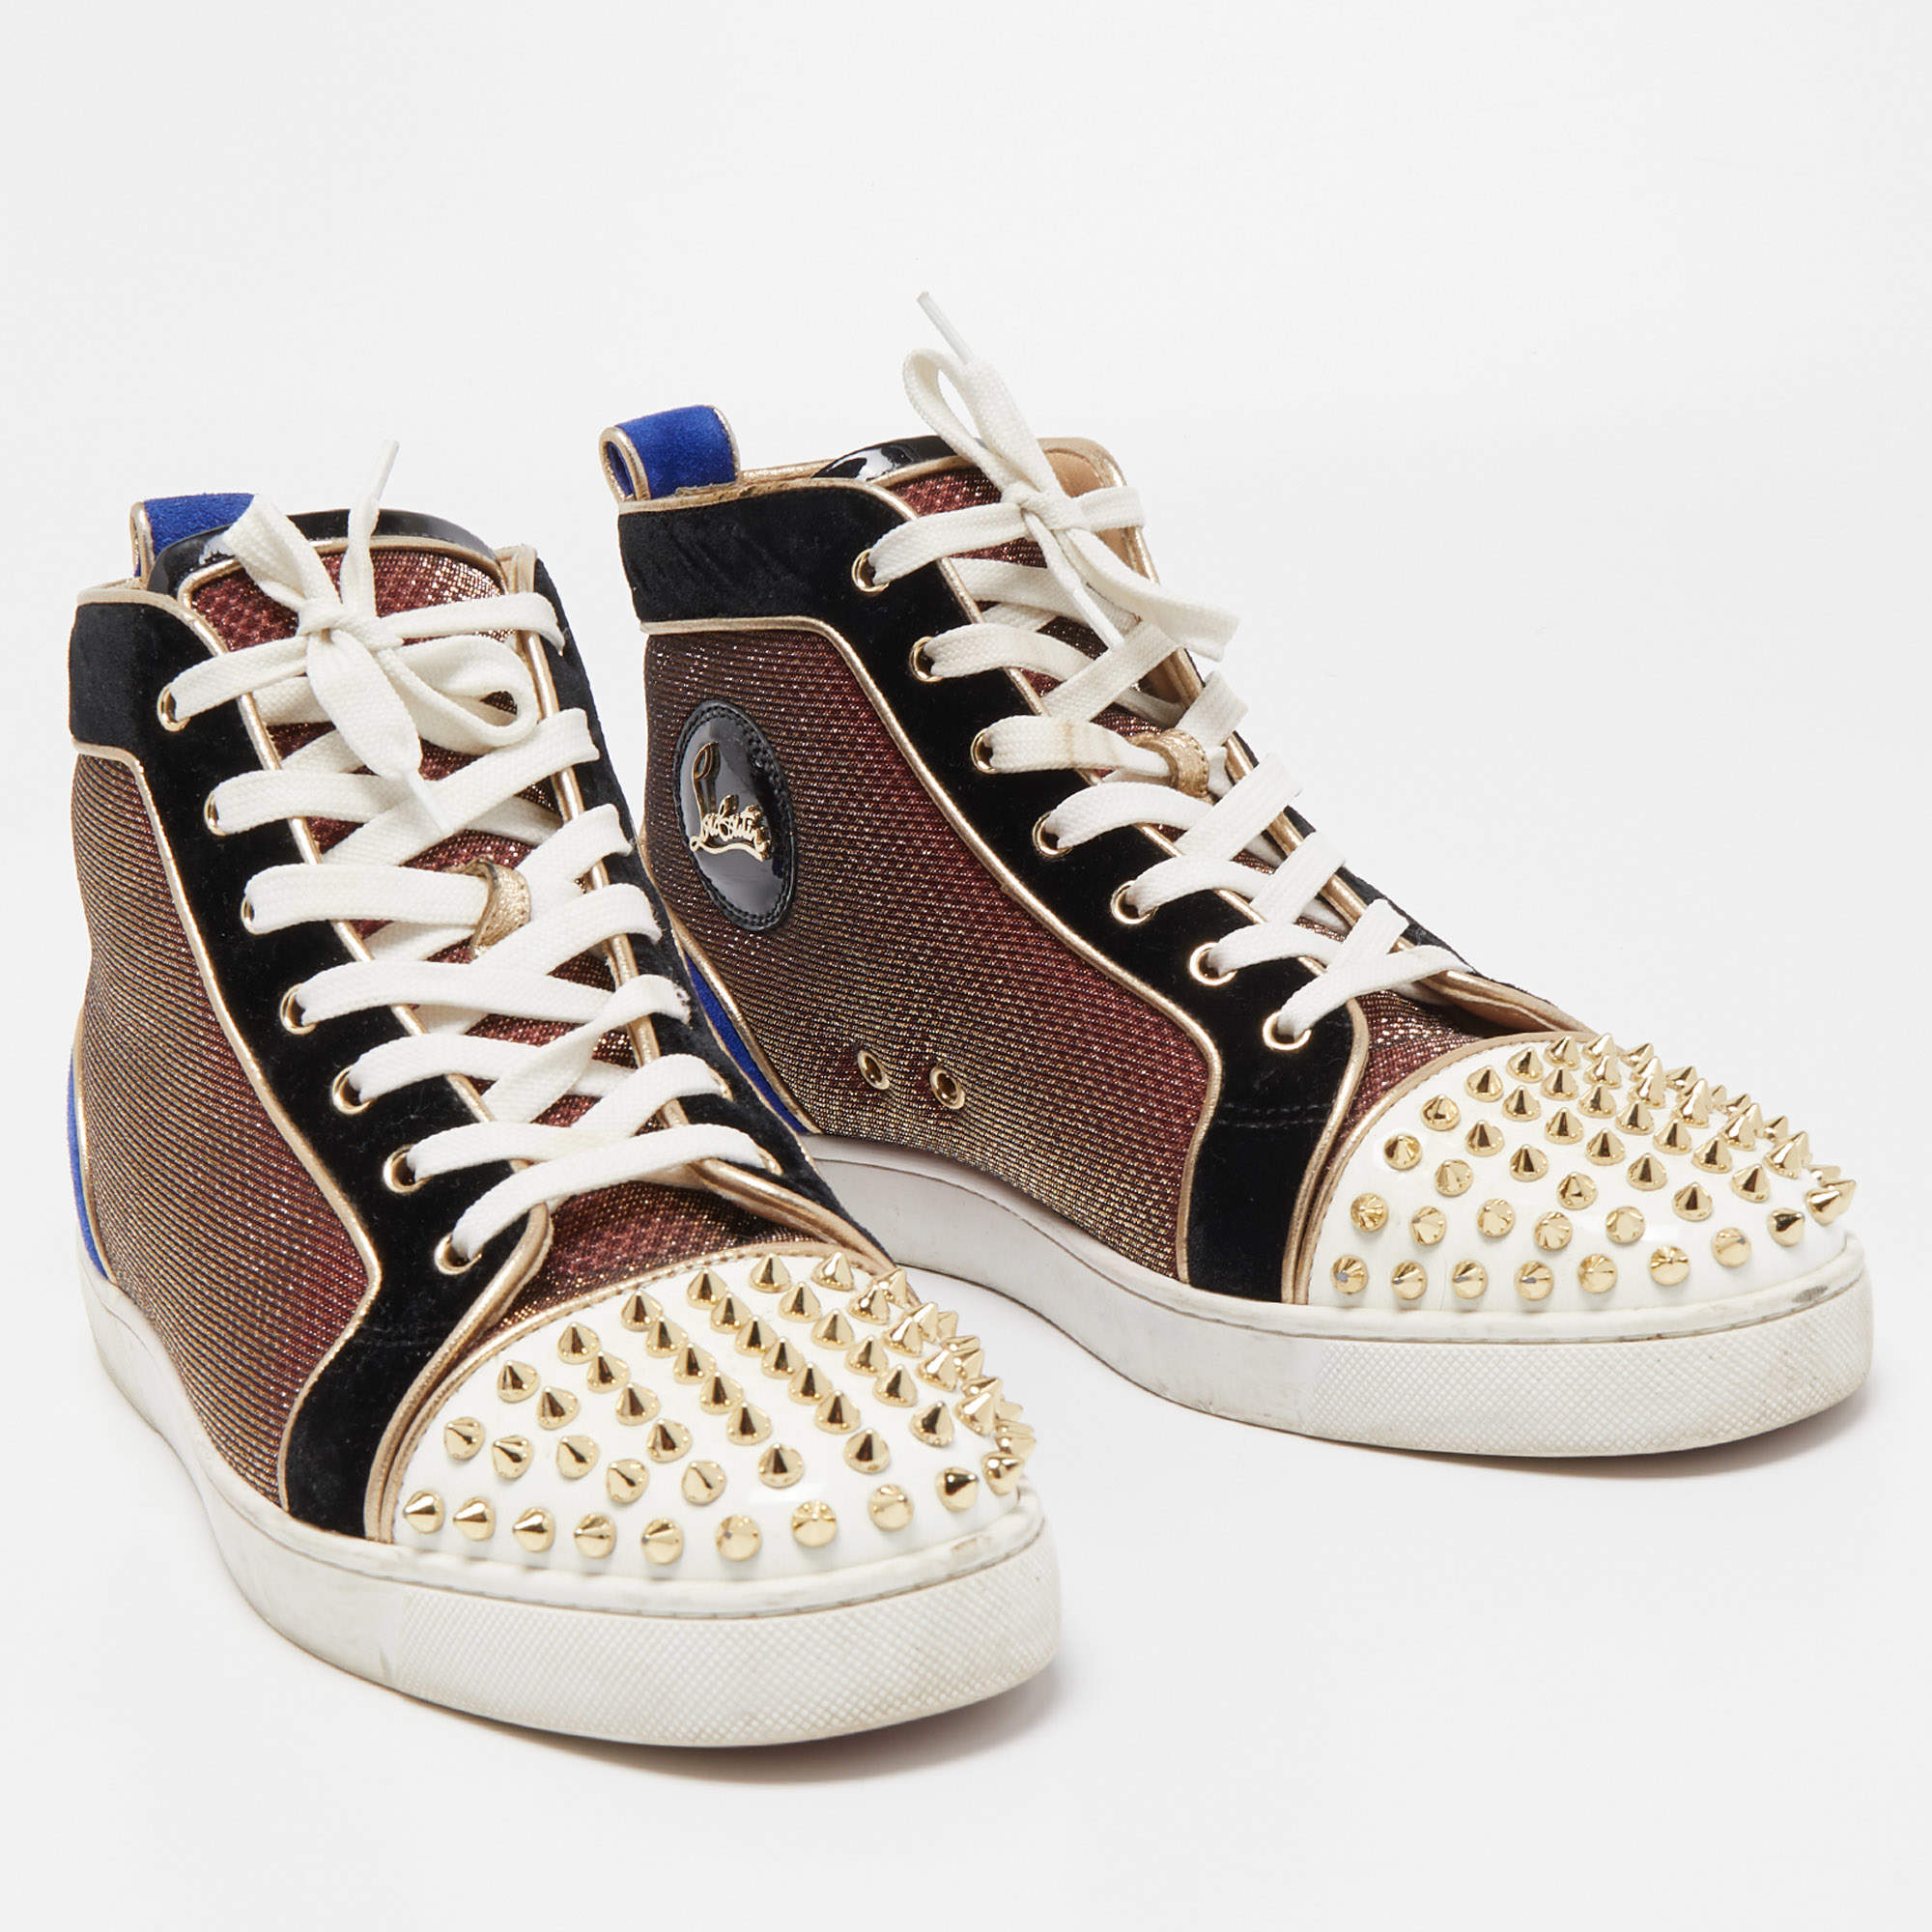 Christian Louboutin Multicolor Patent Leather, Velvet and Fabric Louis Spike  High Top Sneakers Size 42.5 Christian Louboutin